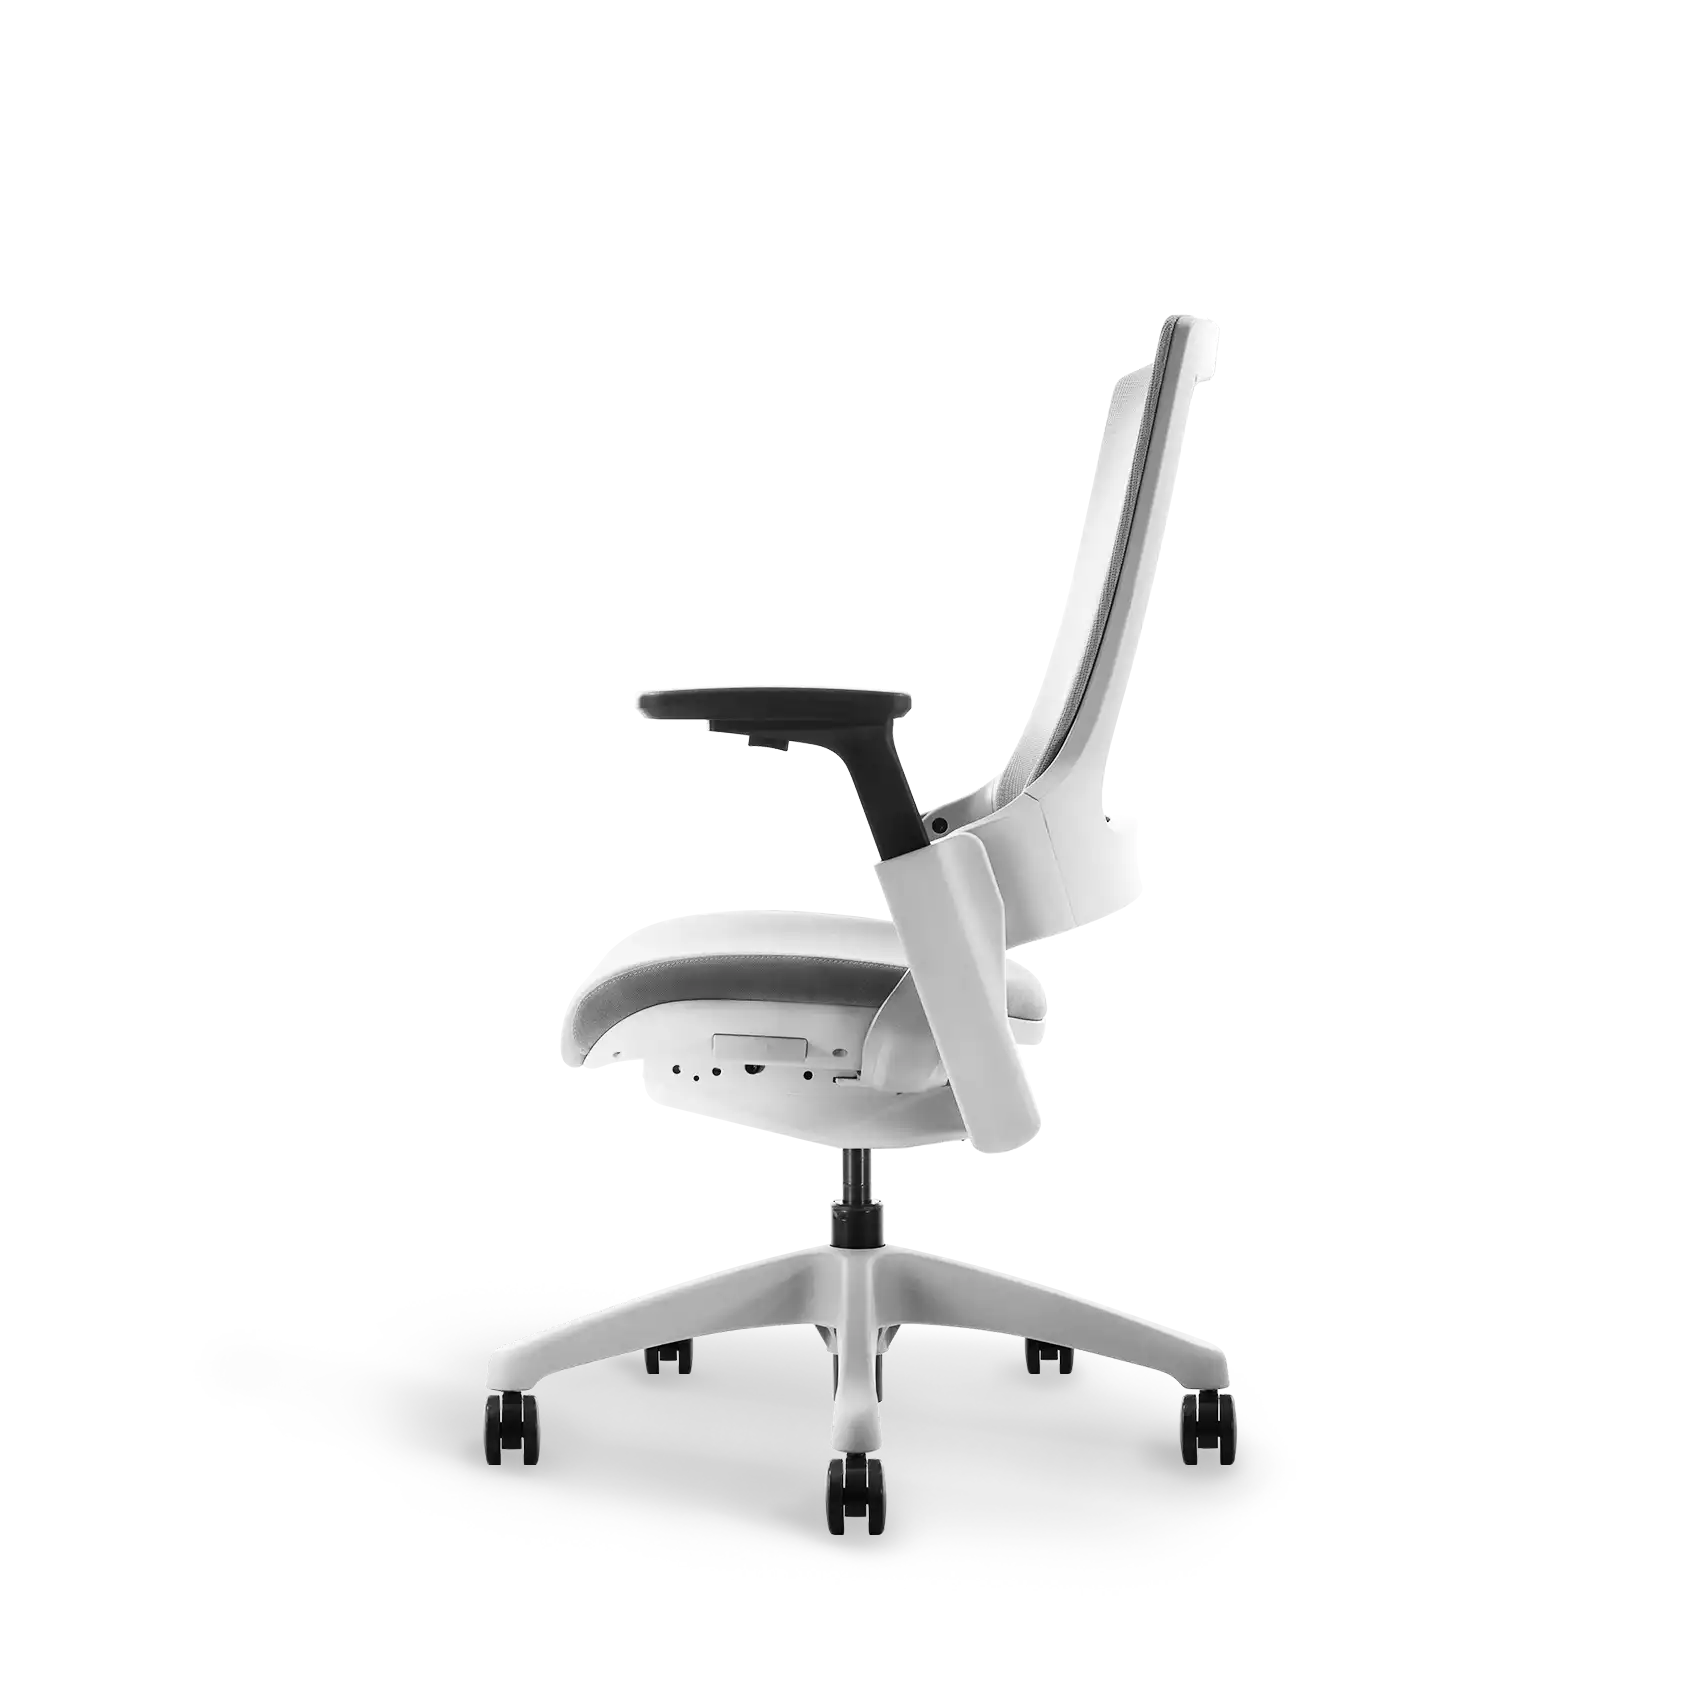 Side perspective of Flujo Angulo grey office chair showing tilt mechanism